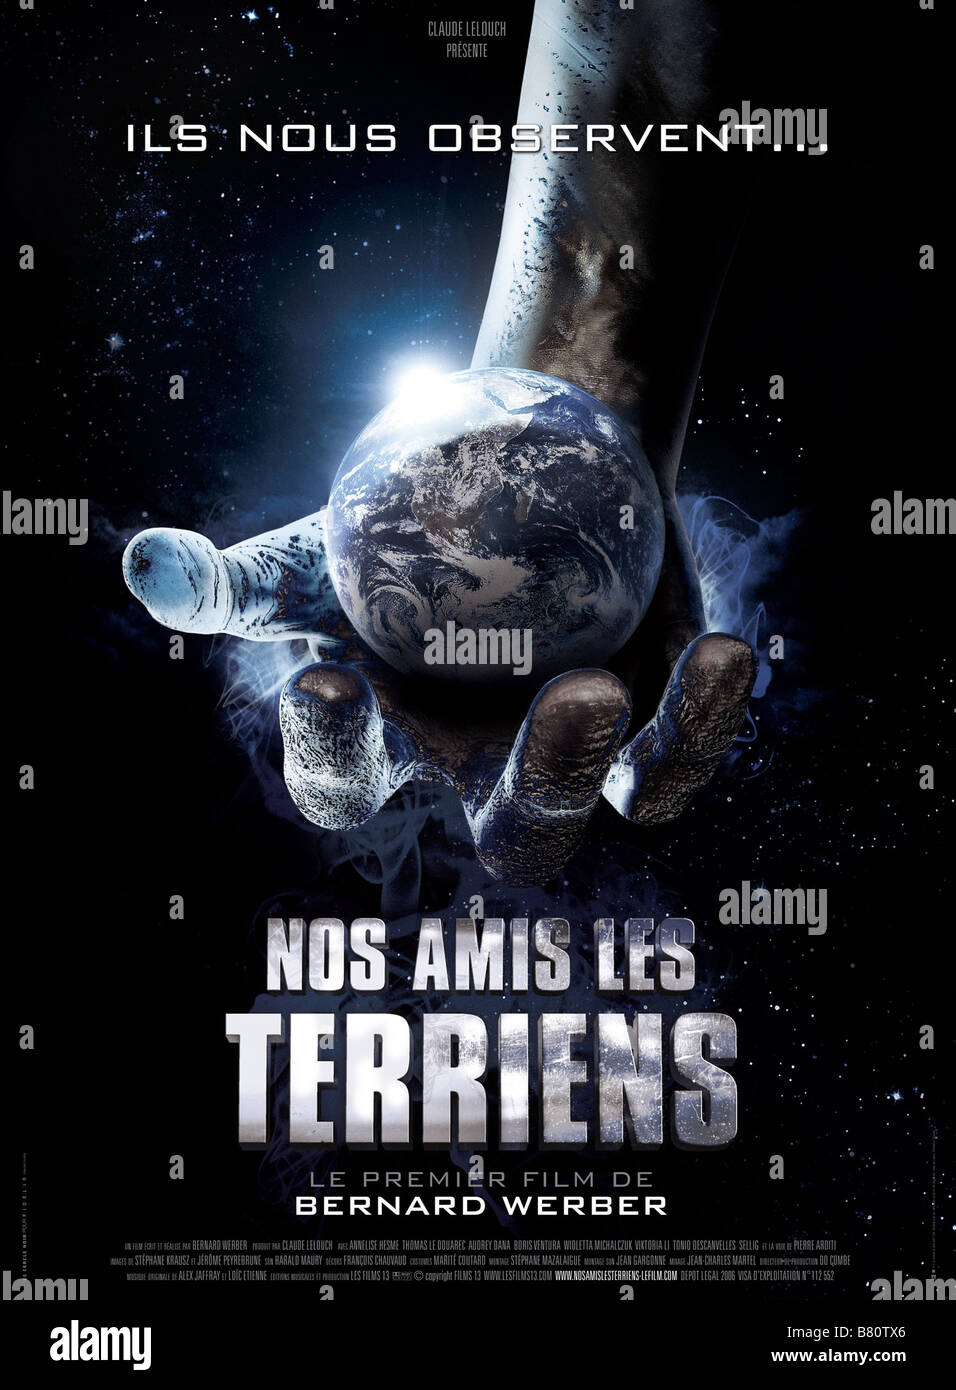 Nos amis les Terriens  Year: 2007 - France Affiche / Poster  Director: Bernard Werber Stock Photo